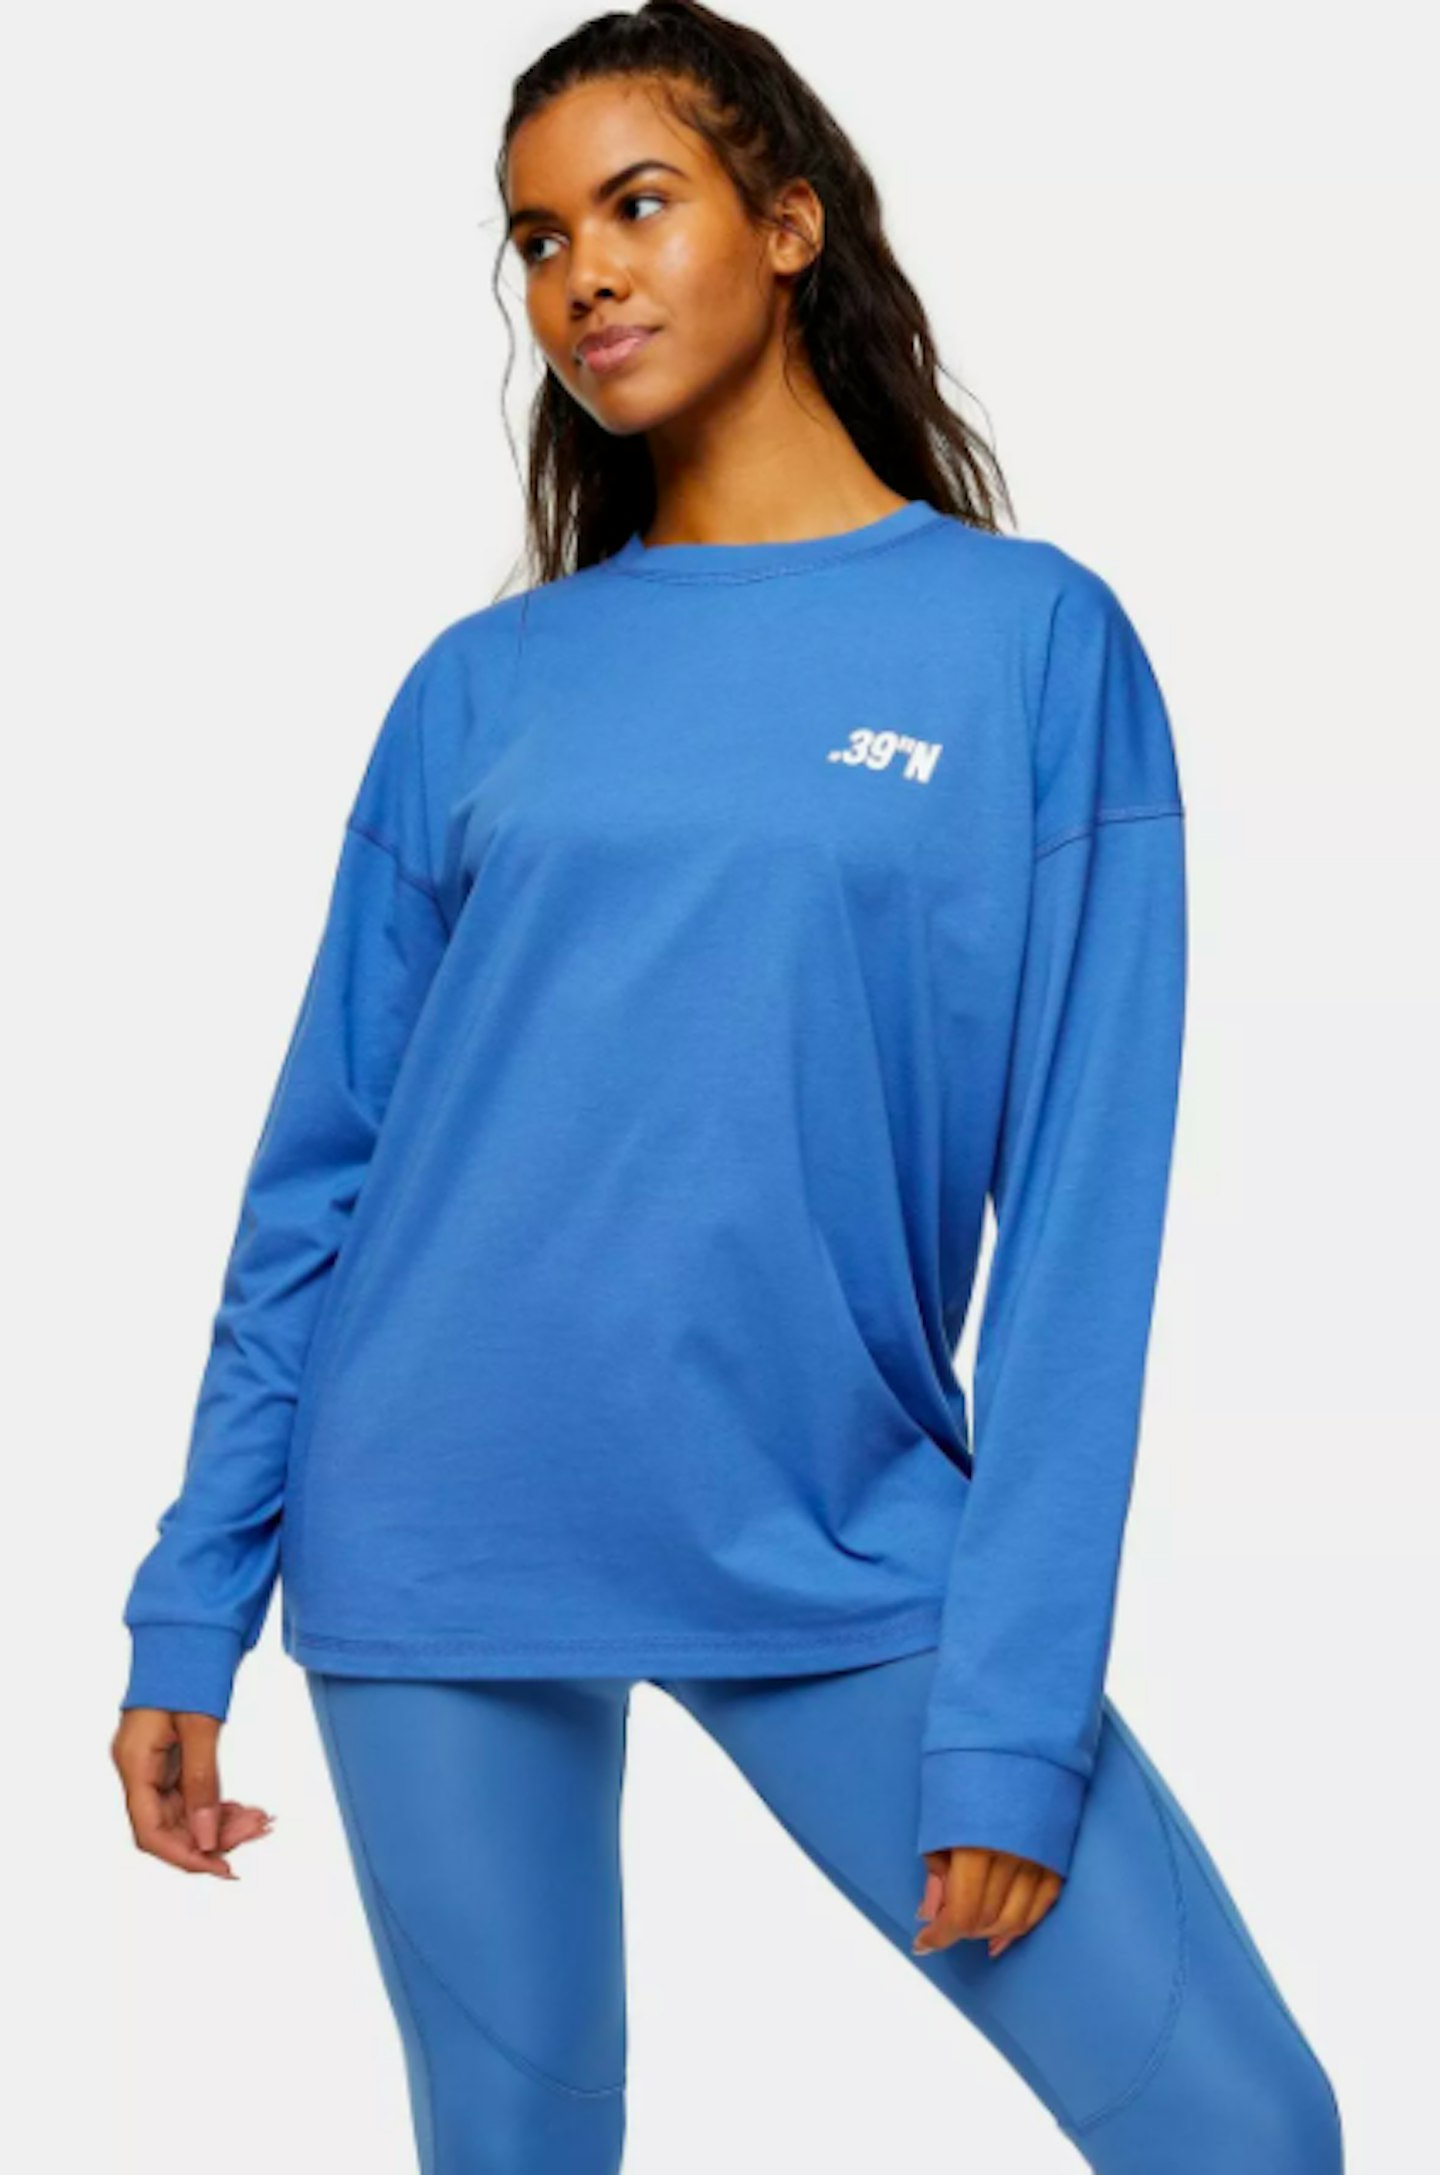 Topshop Active Blue Long Sleeve Sports Top